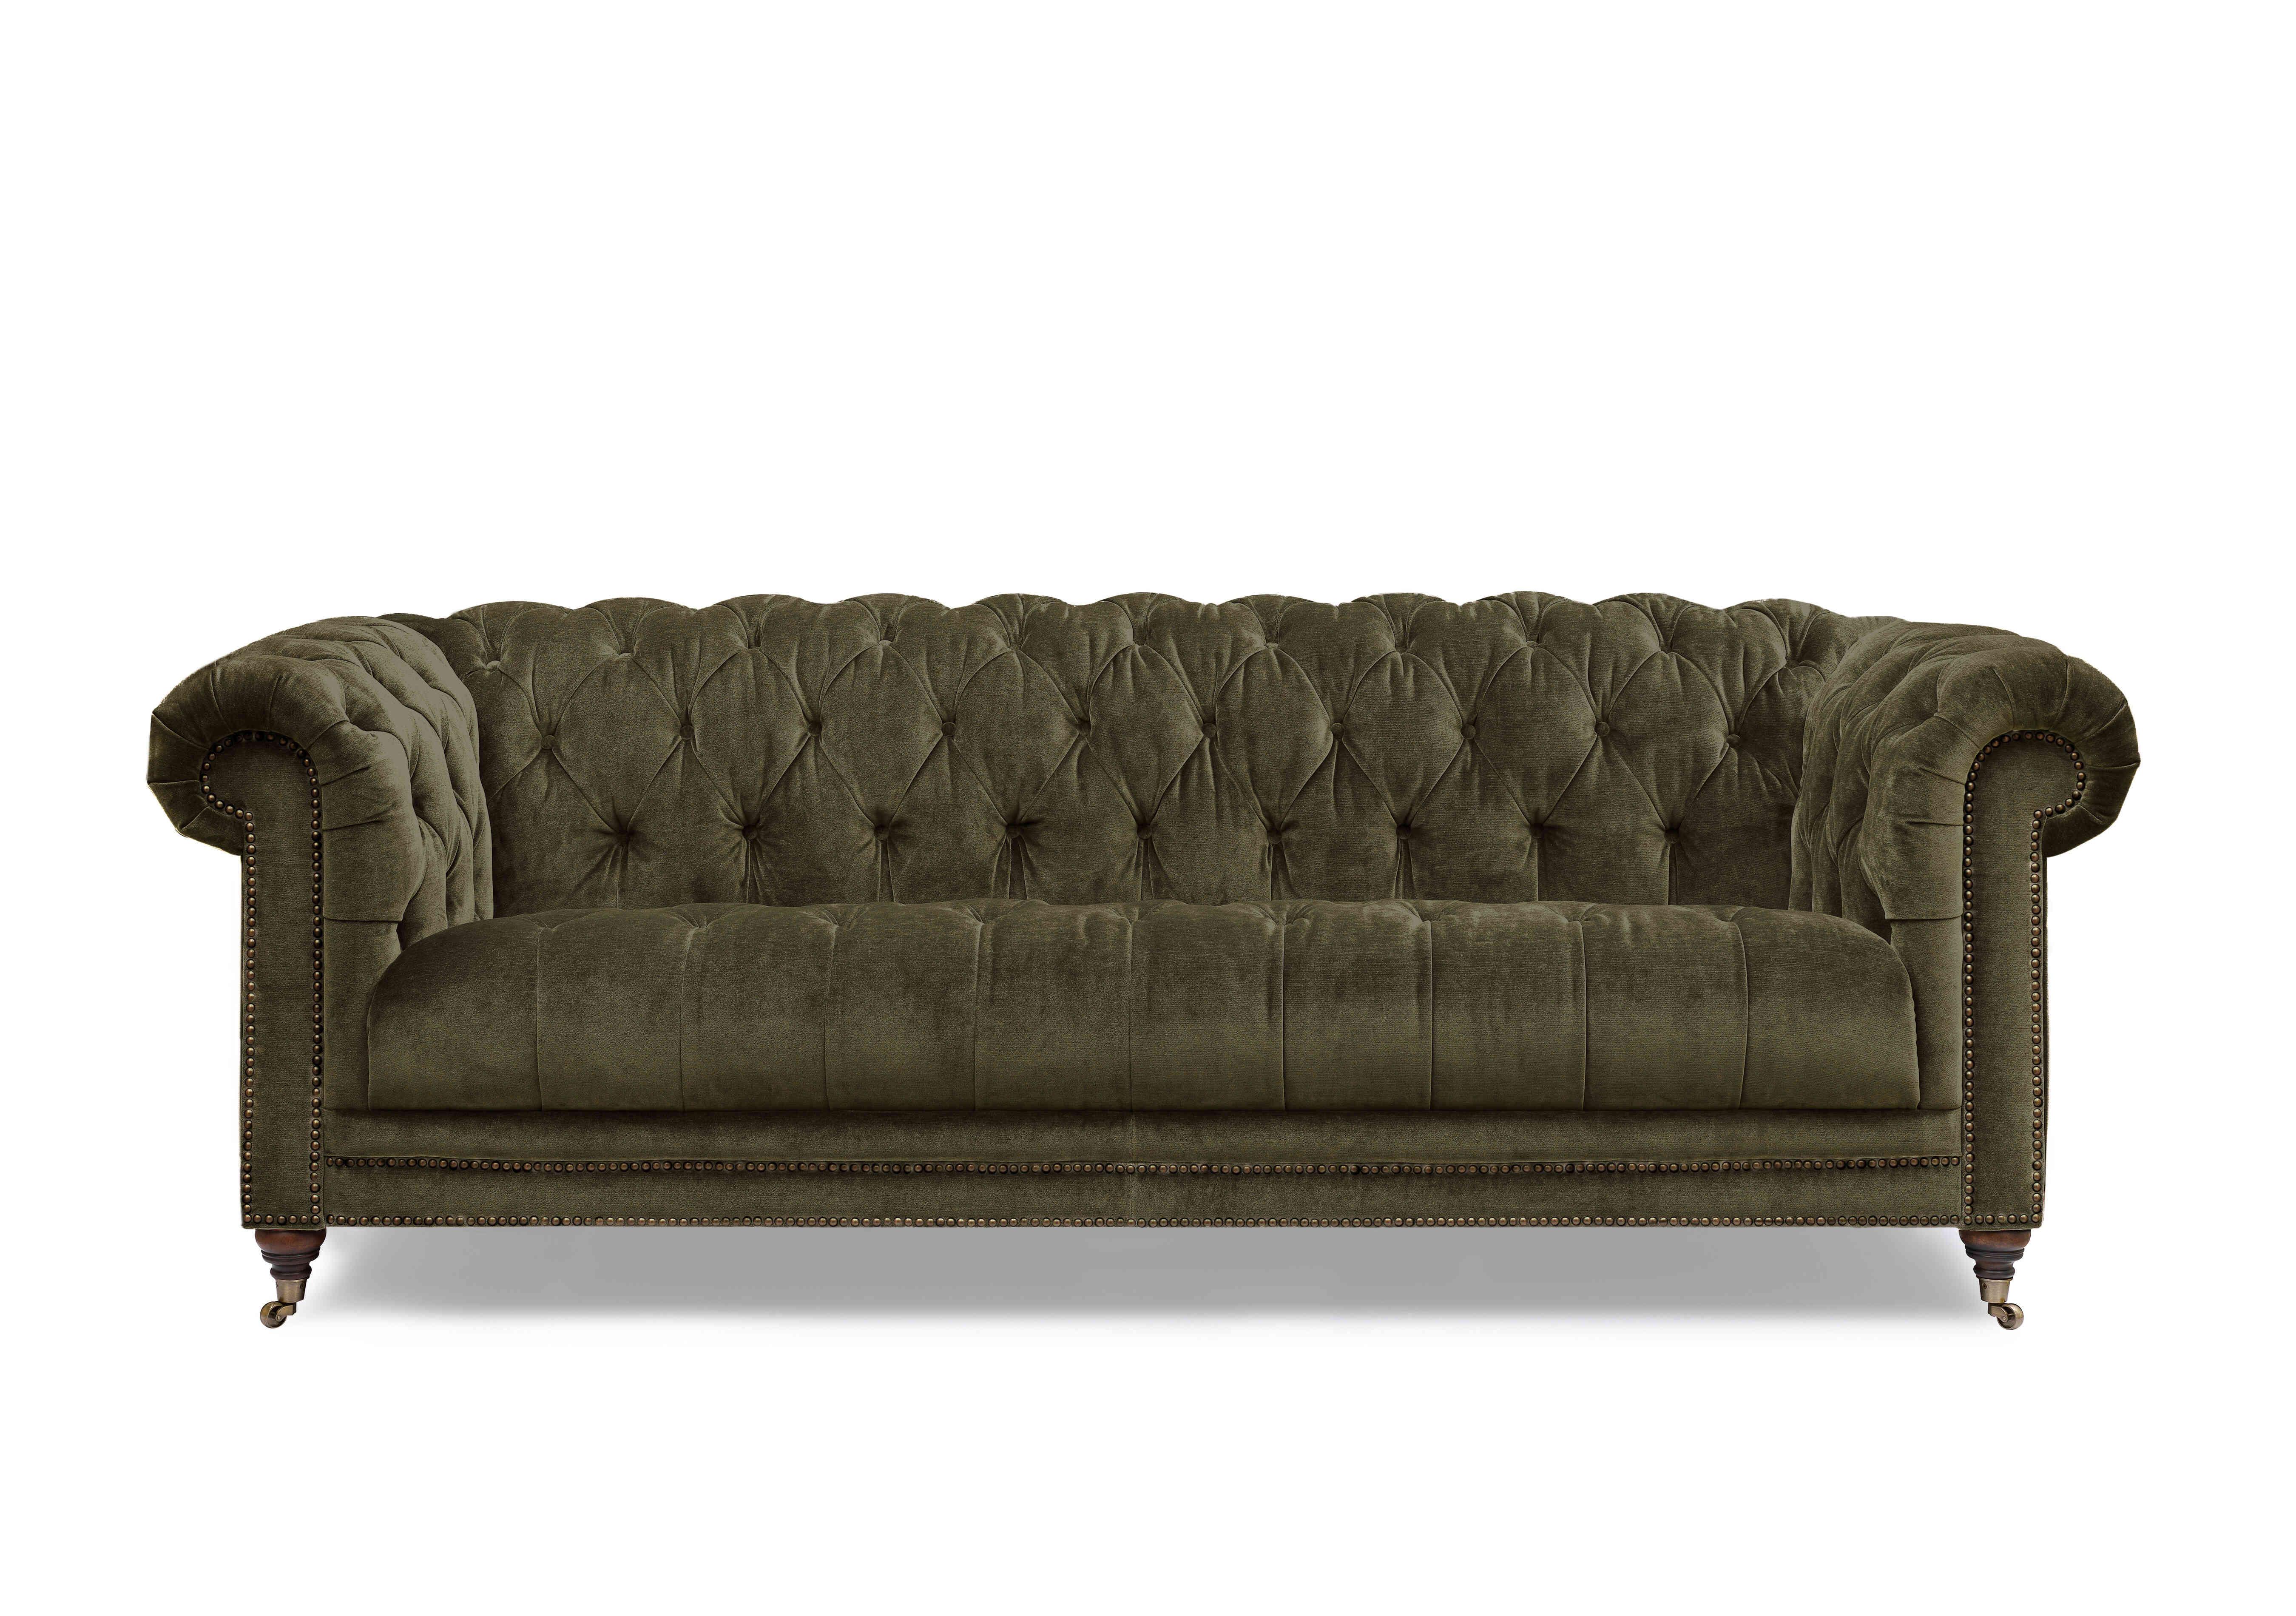 Walter 4 Seater Fabric Chesterfield Sofa with USB-C in X3y1-W018 Pine on Furniture Village